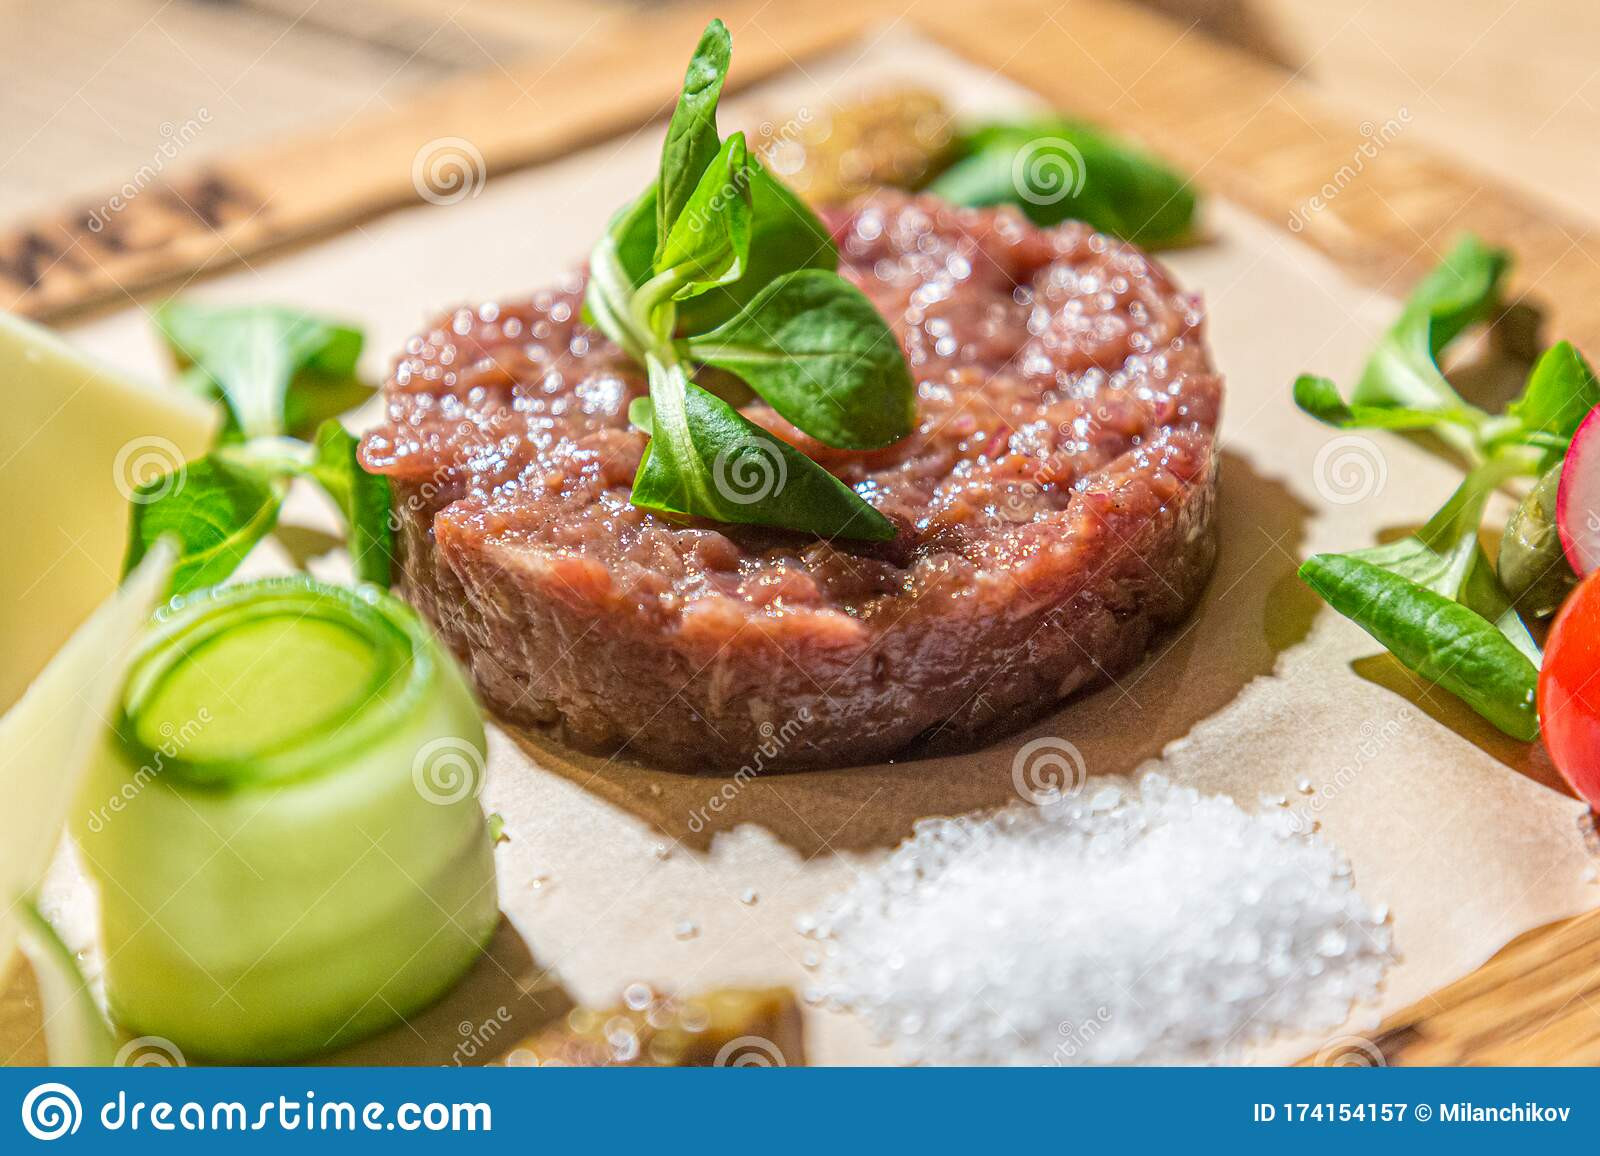 Raw Meat Appetizer
 Tartare a Traditional Appetizer Raw Beef Stock Image